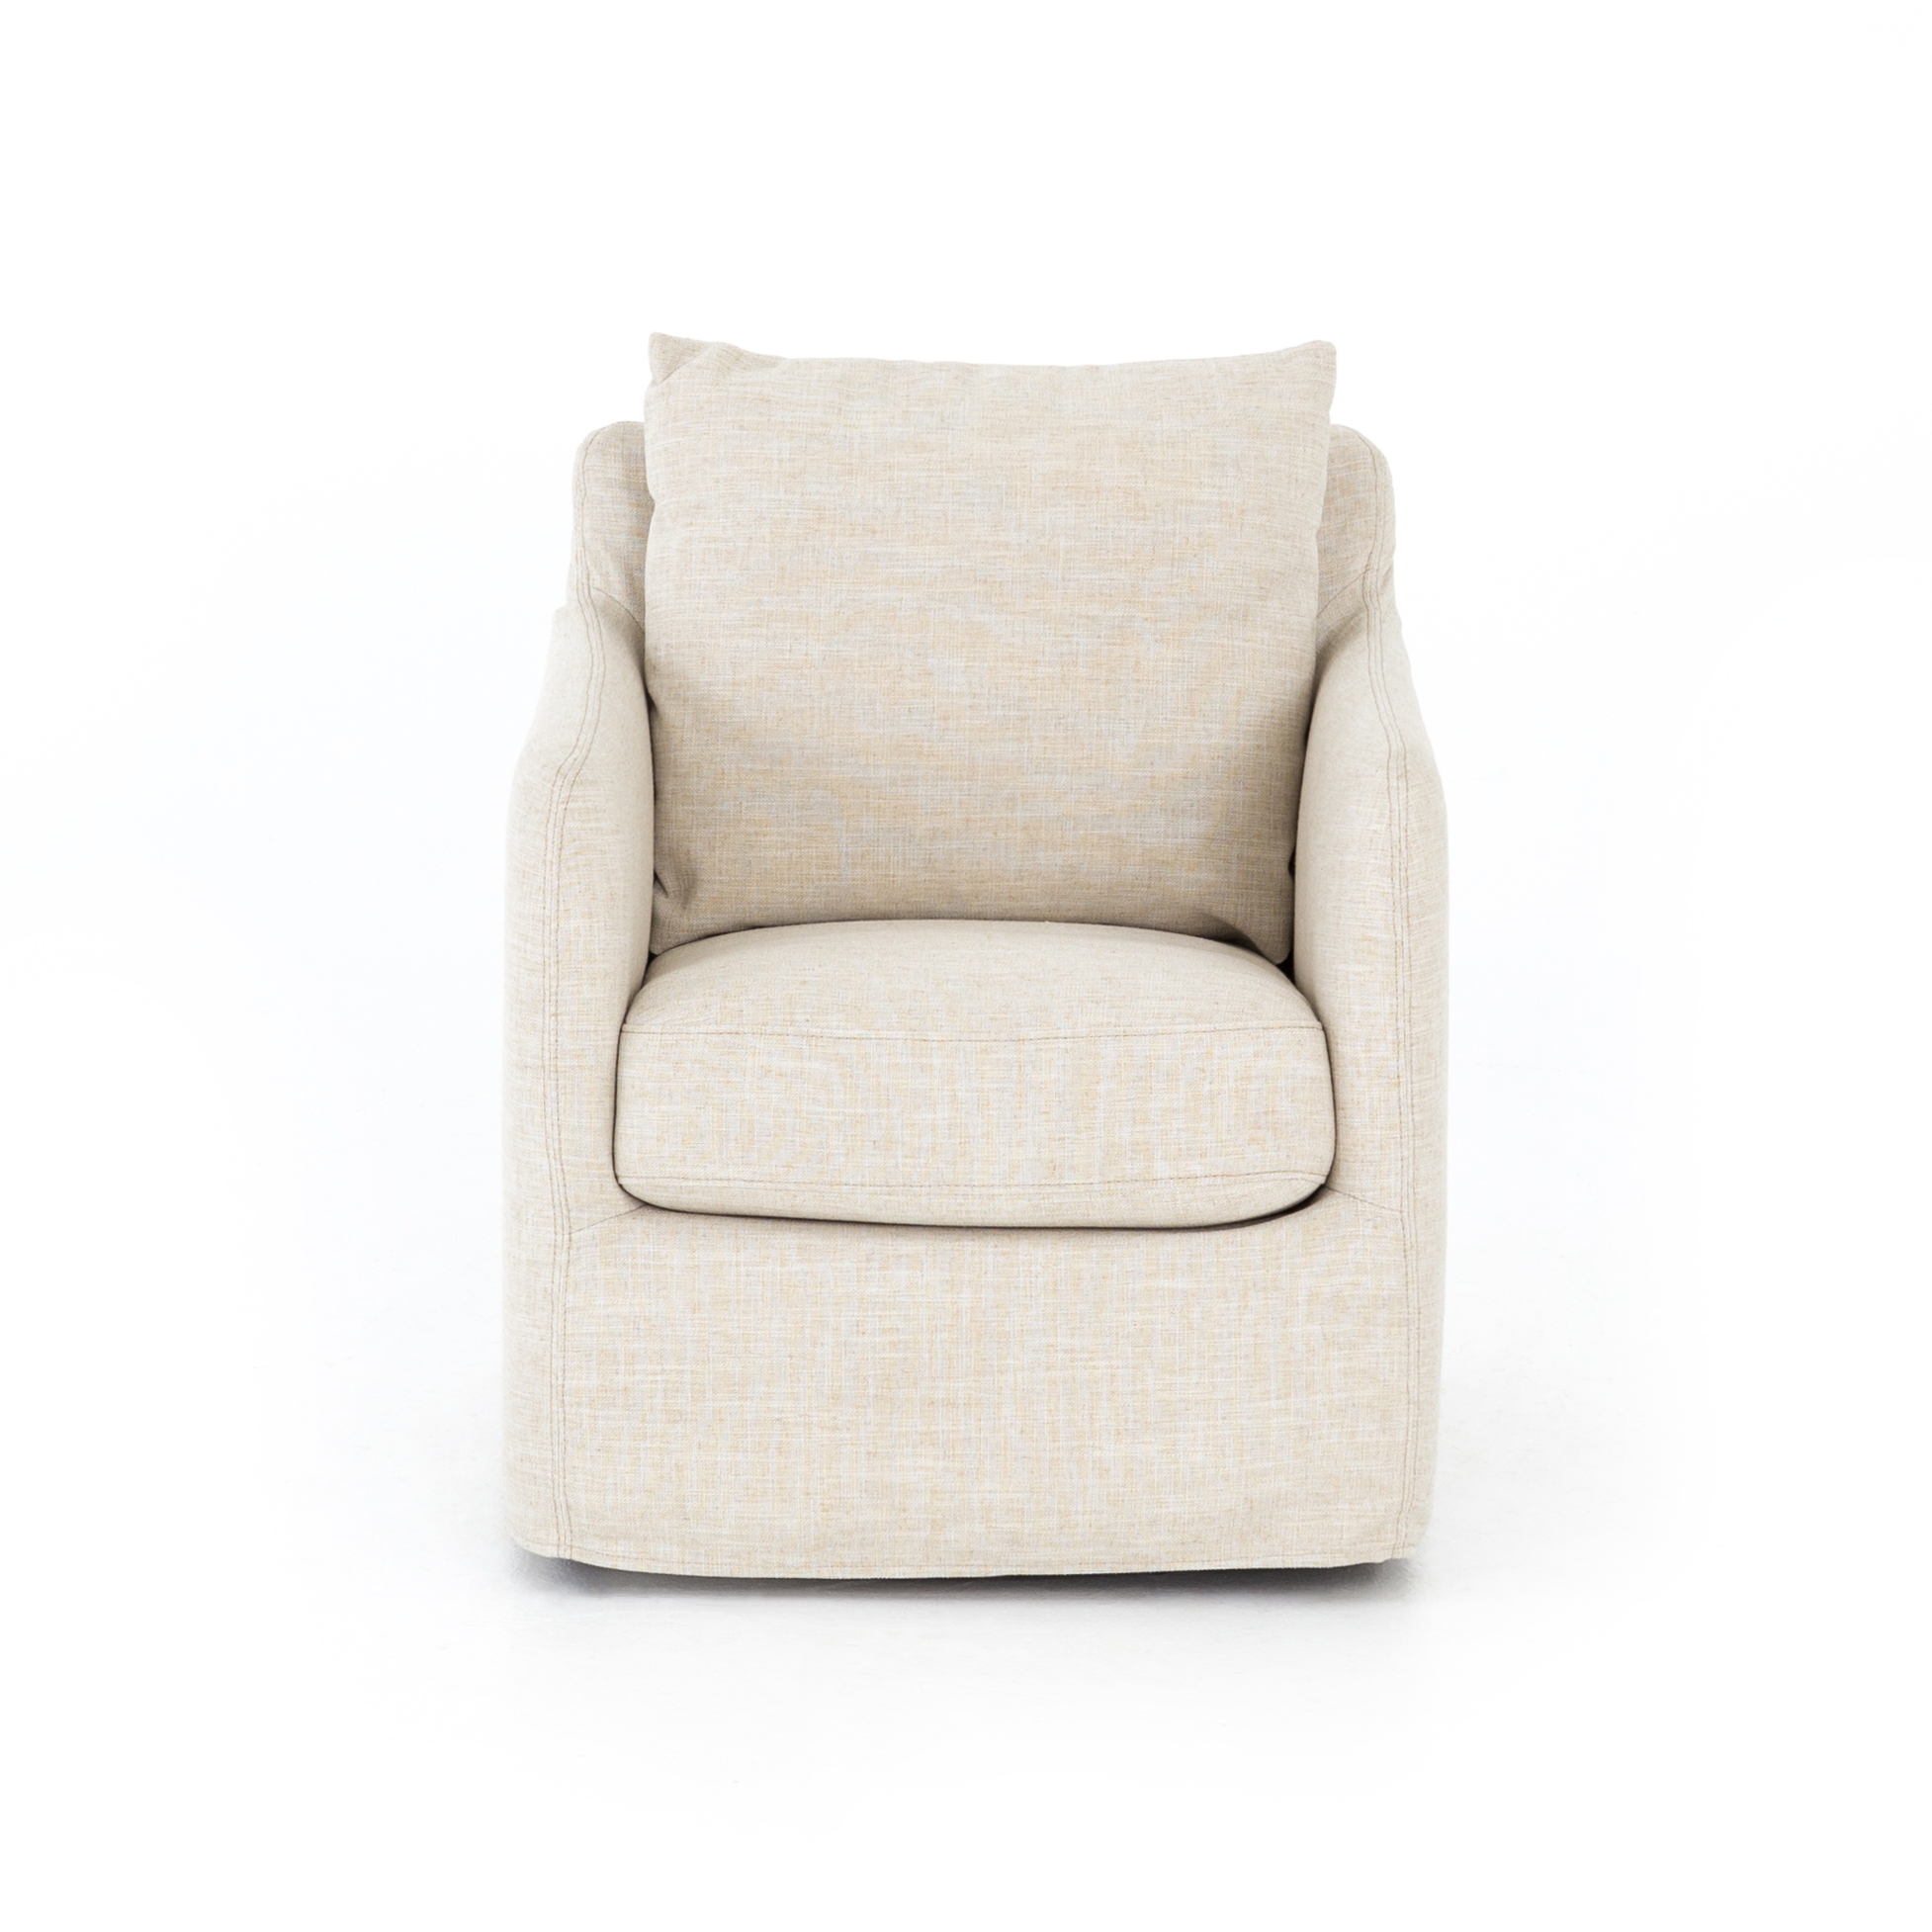 Banks Swivel Chair-Cambric Ivory - Image 4